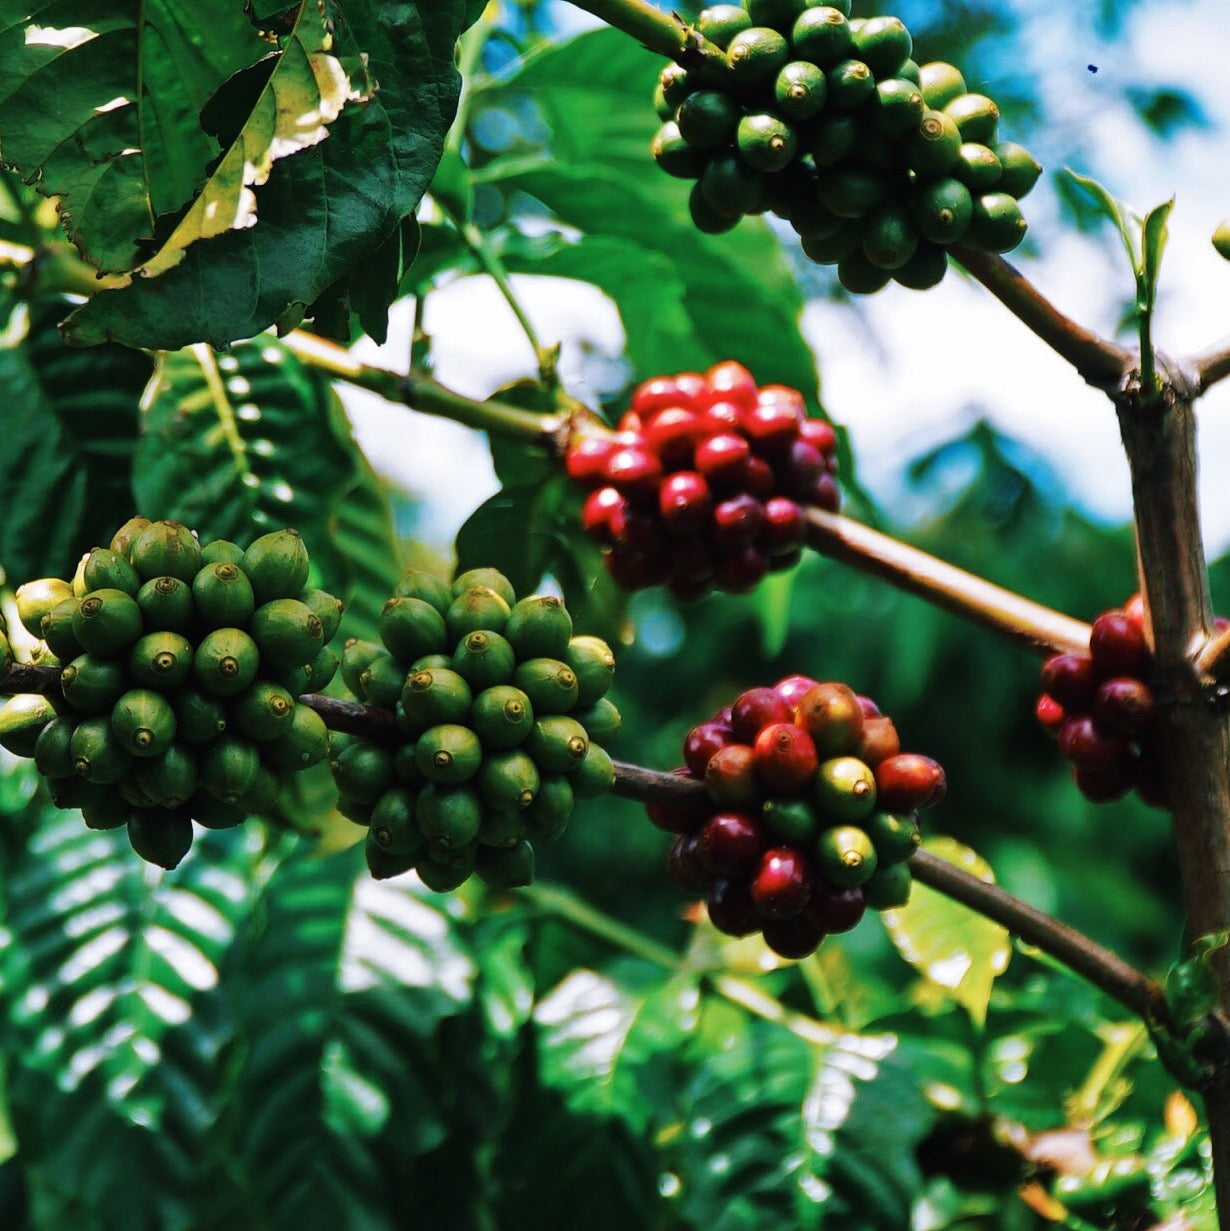 7 Differences between Arabica and Robusta Coffee